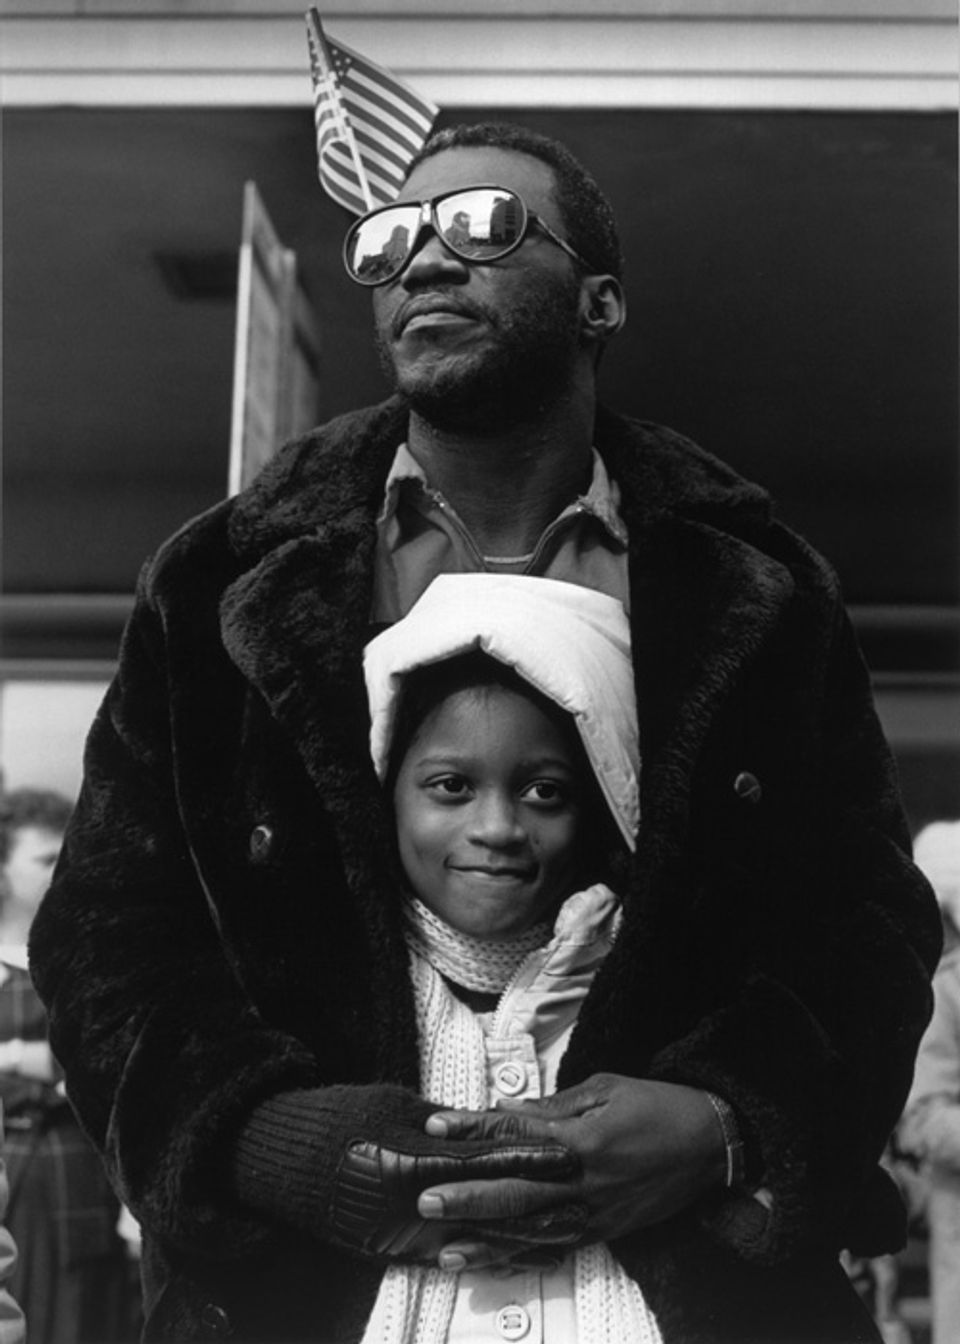 Hudnall's gelatin silver print of a man holding a young girl.